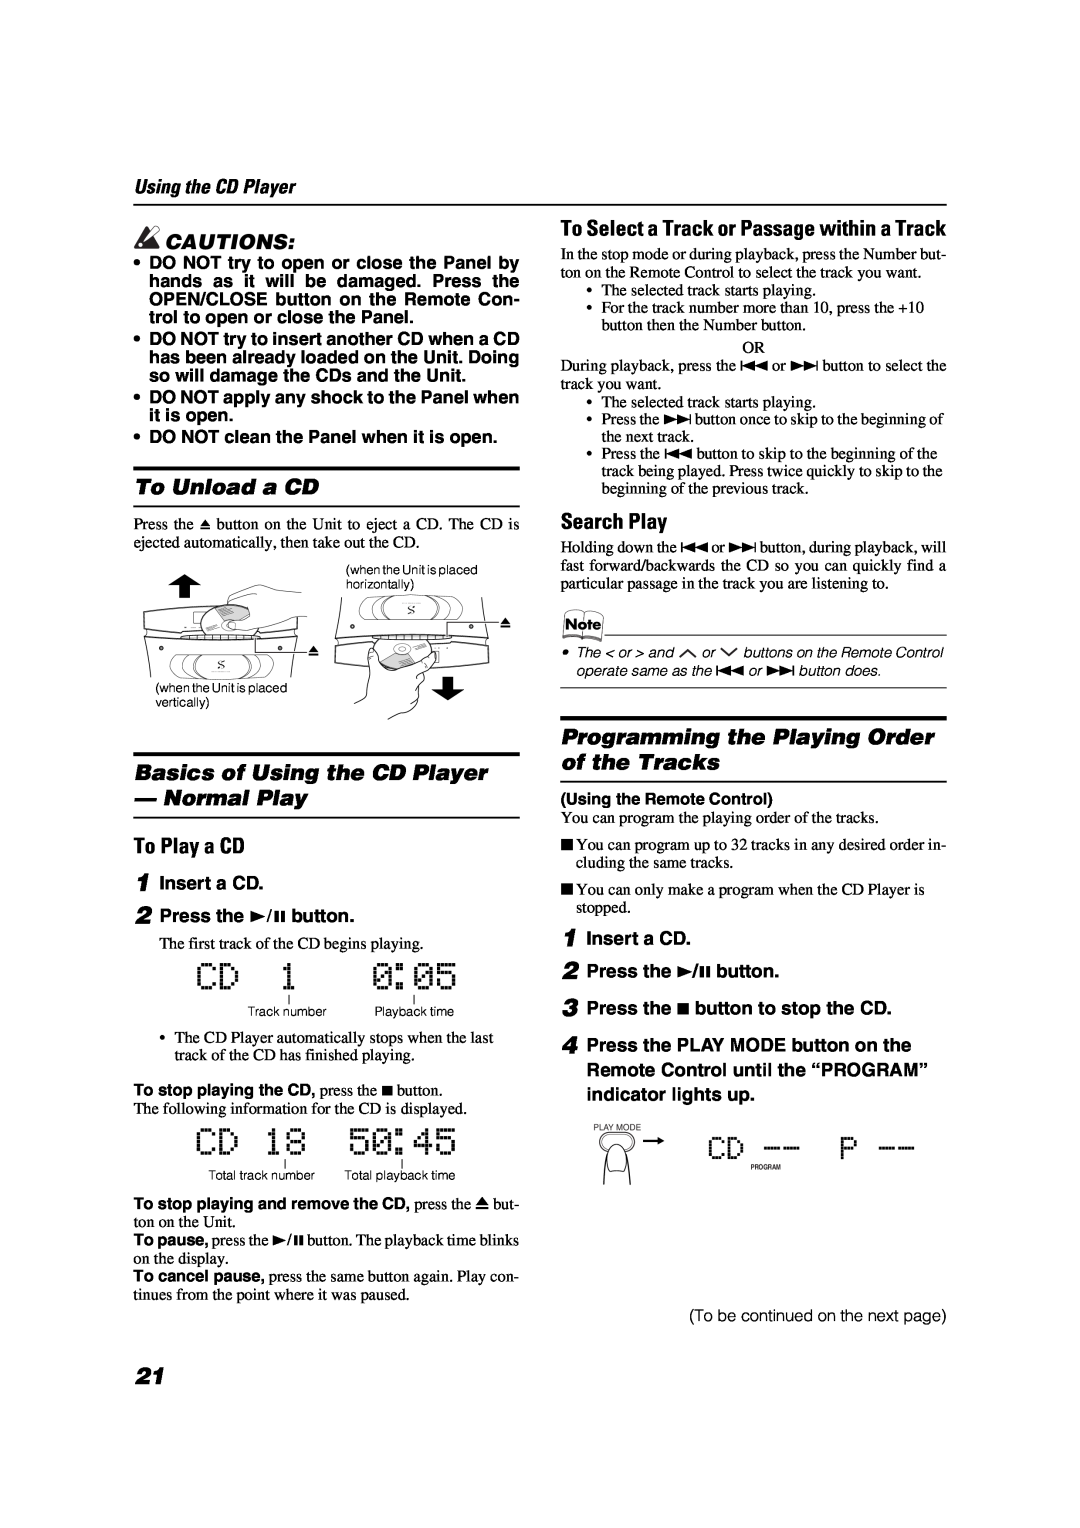 JVC LVT0853-009B, P-VSDT6 To Unload a CD, Basics of Using the CD Player - Normal Play, To Play a CD, Search Play, Cautions 